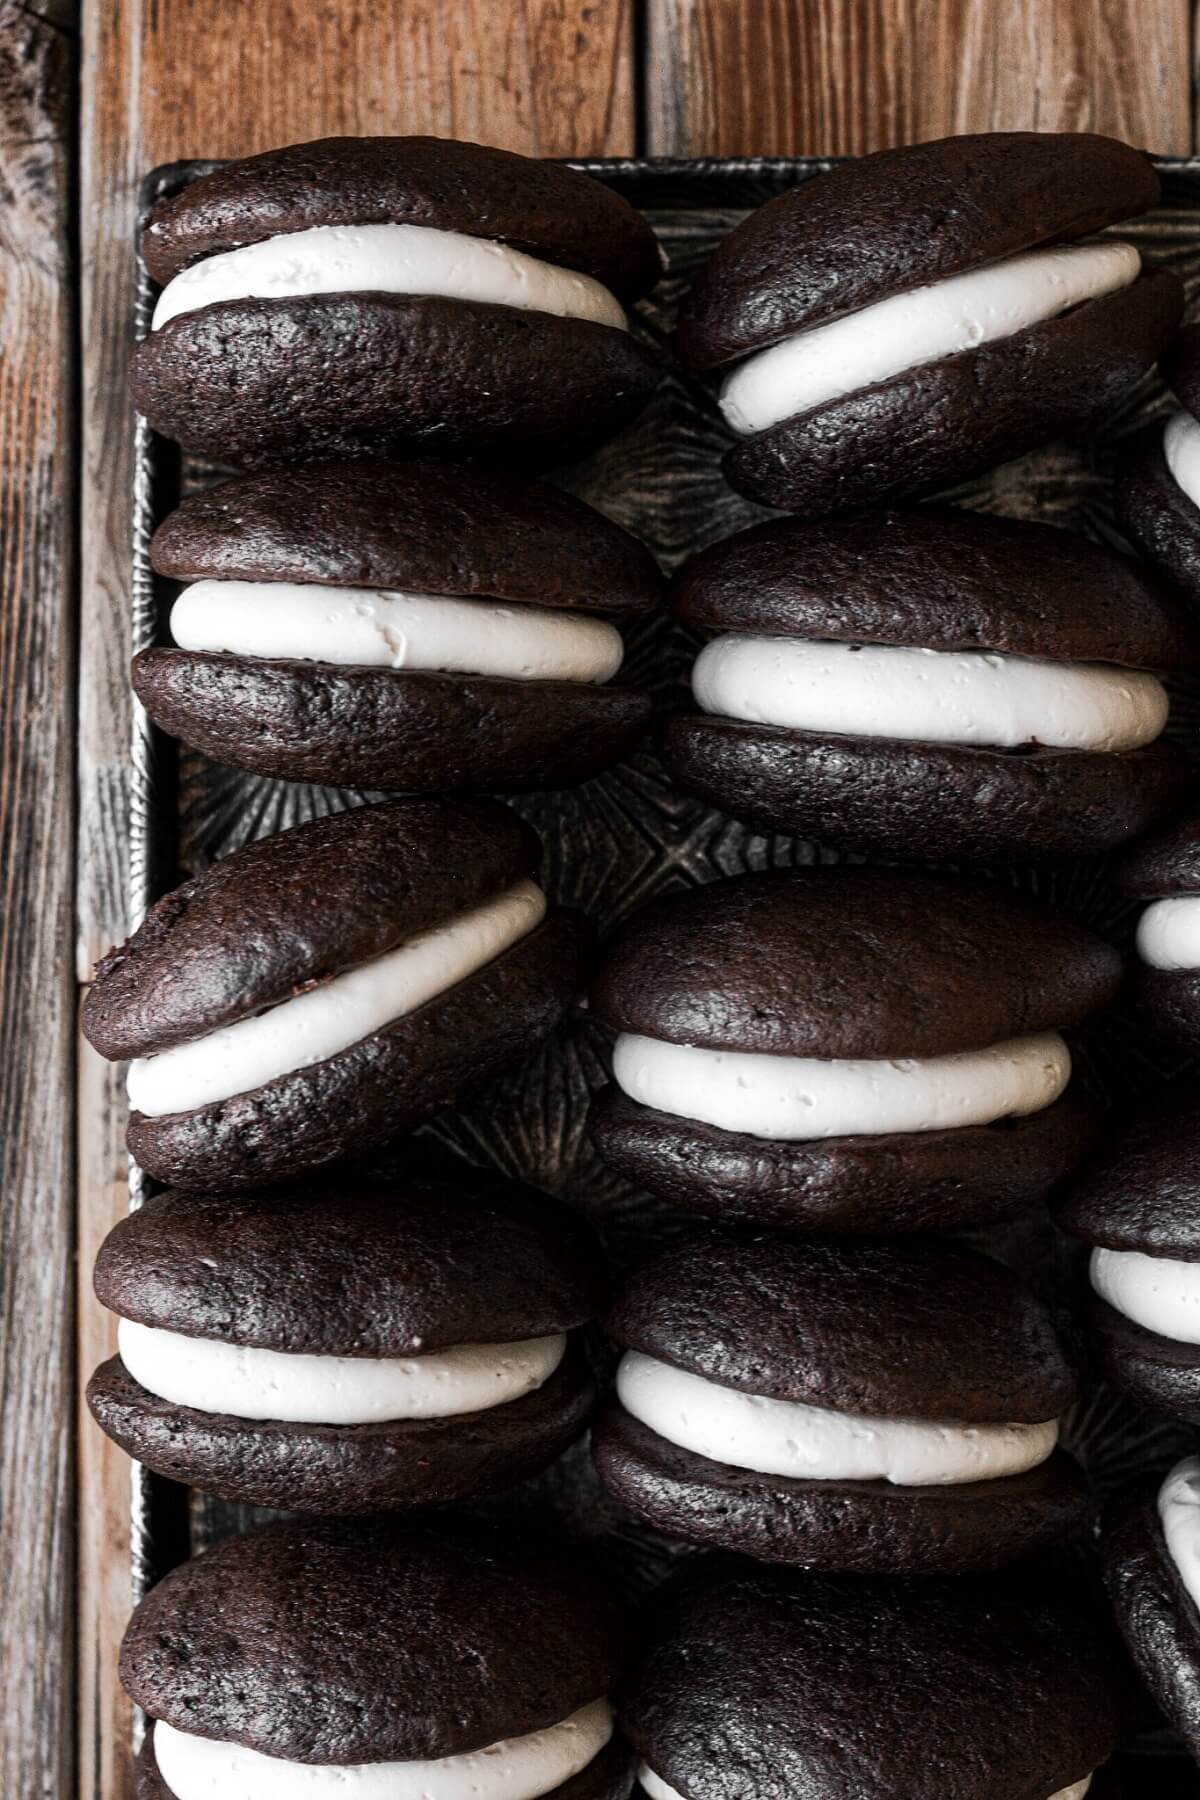 Chocolate whoopie pies with cream filling on a baking sheet.